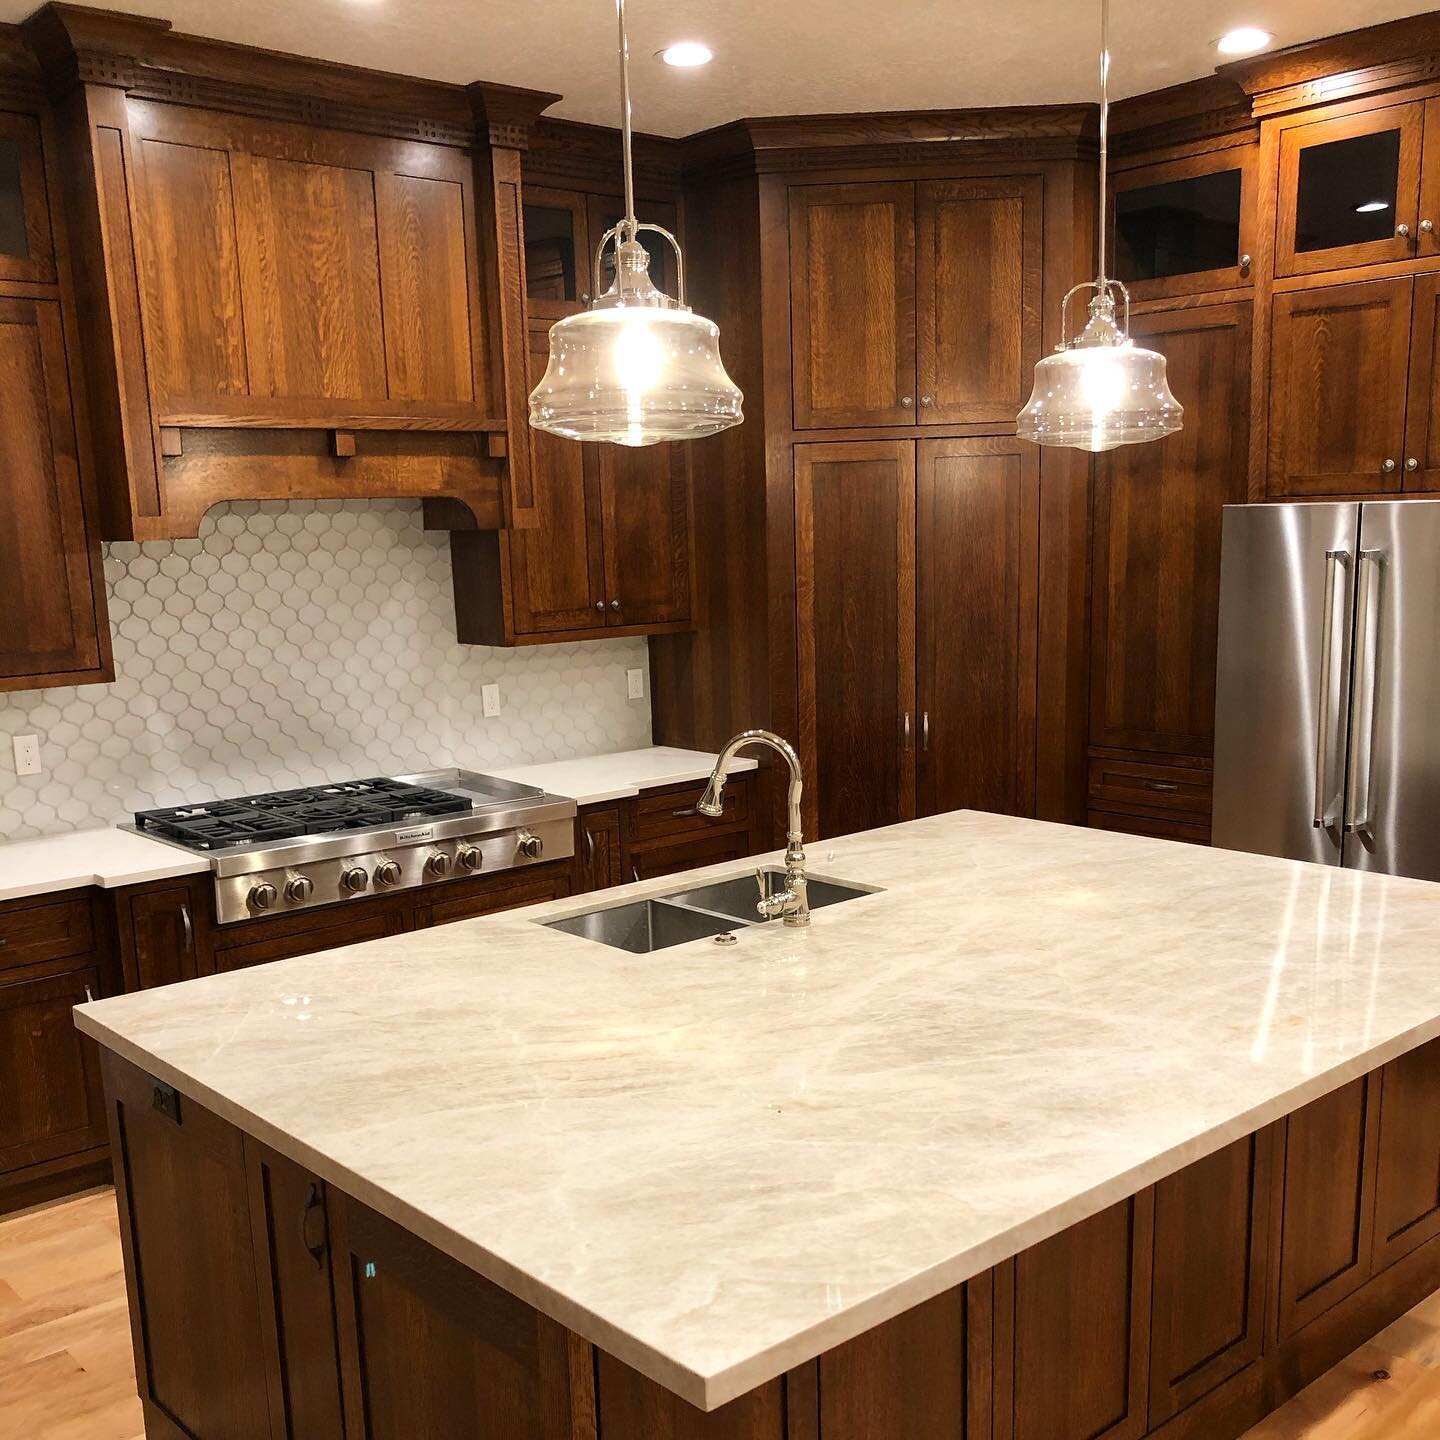 Check out this traditional kitchen we just finished, can&rsquo;t beat the classic beauty of quarter-sawn white oak!  #huntingtonhomesut #customhomes #customkitchen #huntingtonhomeskitchens #utahbuilders #utahvalleybuilder #quartersawnoak